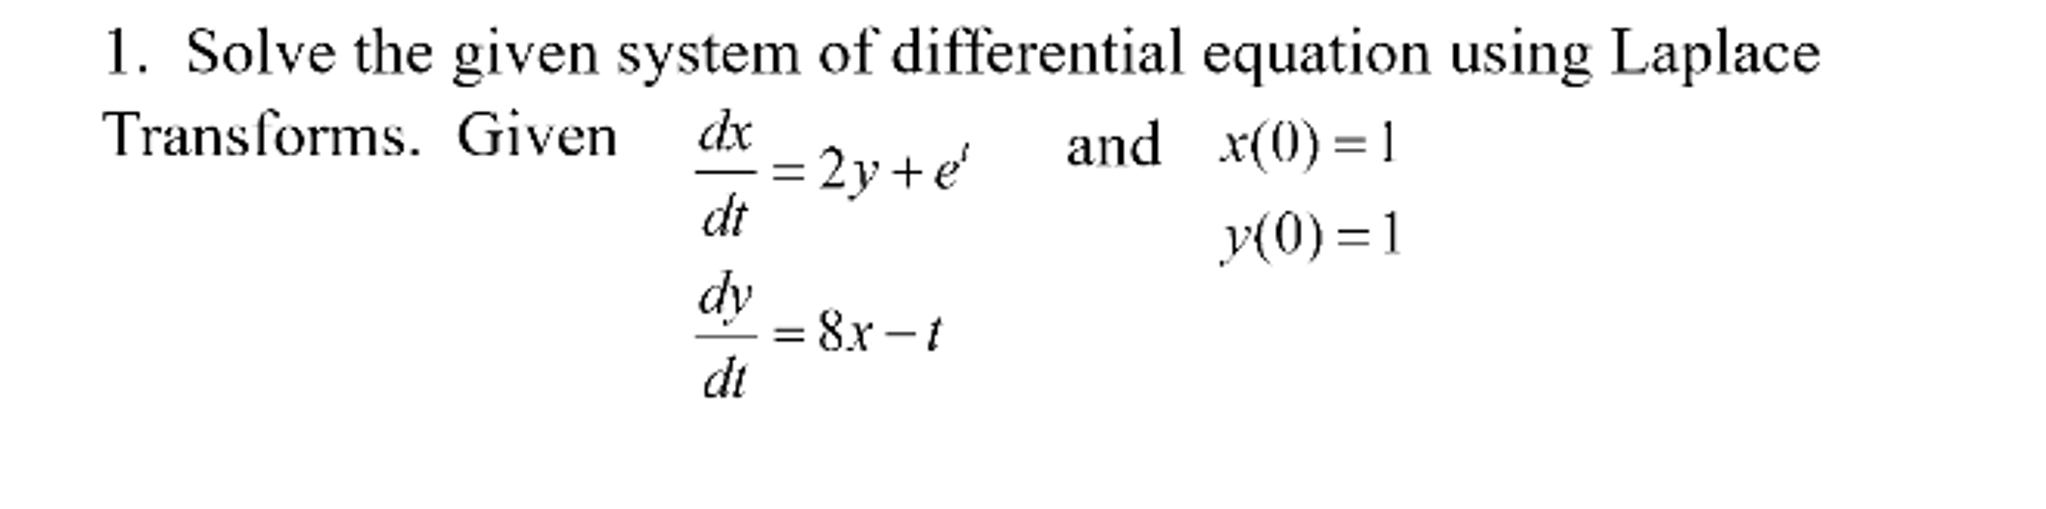 solving differential equations with matrices